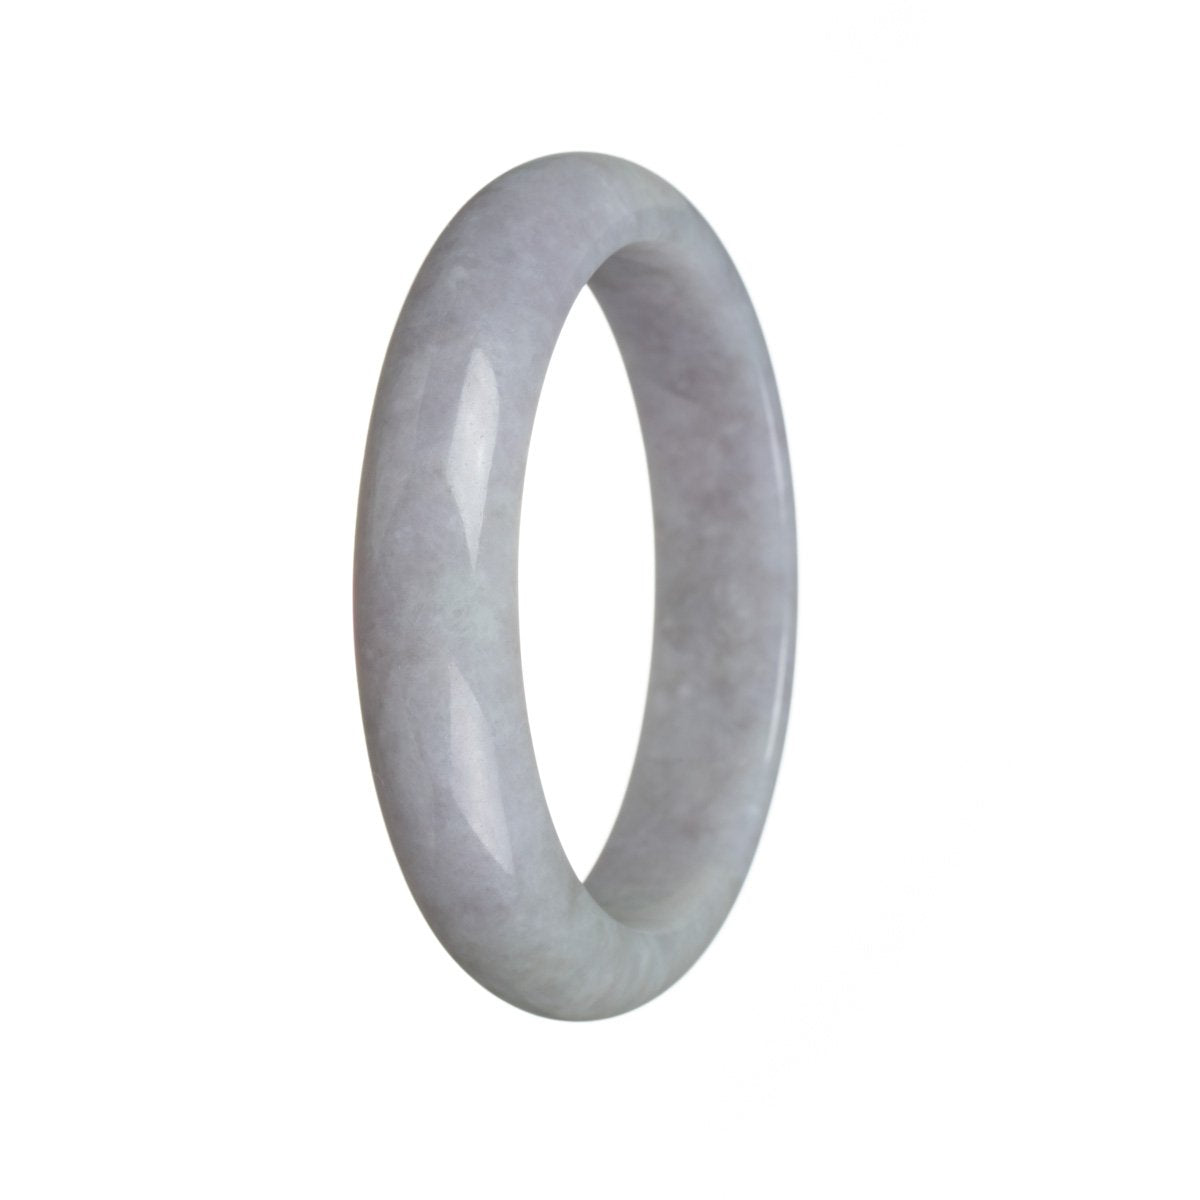 A lavender Burmese jade bangle bracelet, featuring a genuine Type A jade stone in a semi-round shape. This elegant piece of jewelry measures 61mm and is from the MAYS collection.